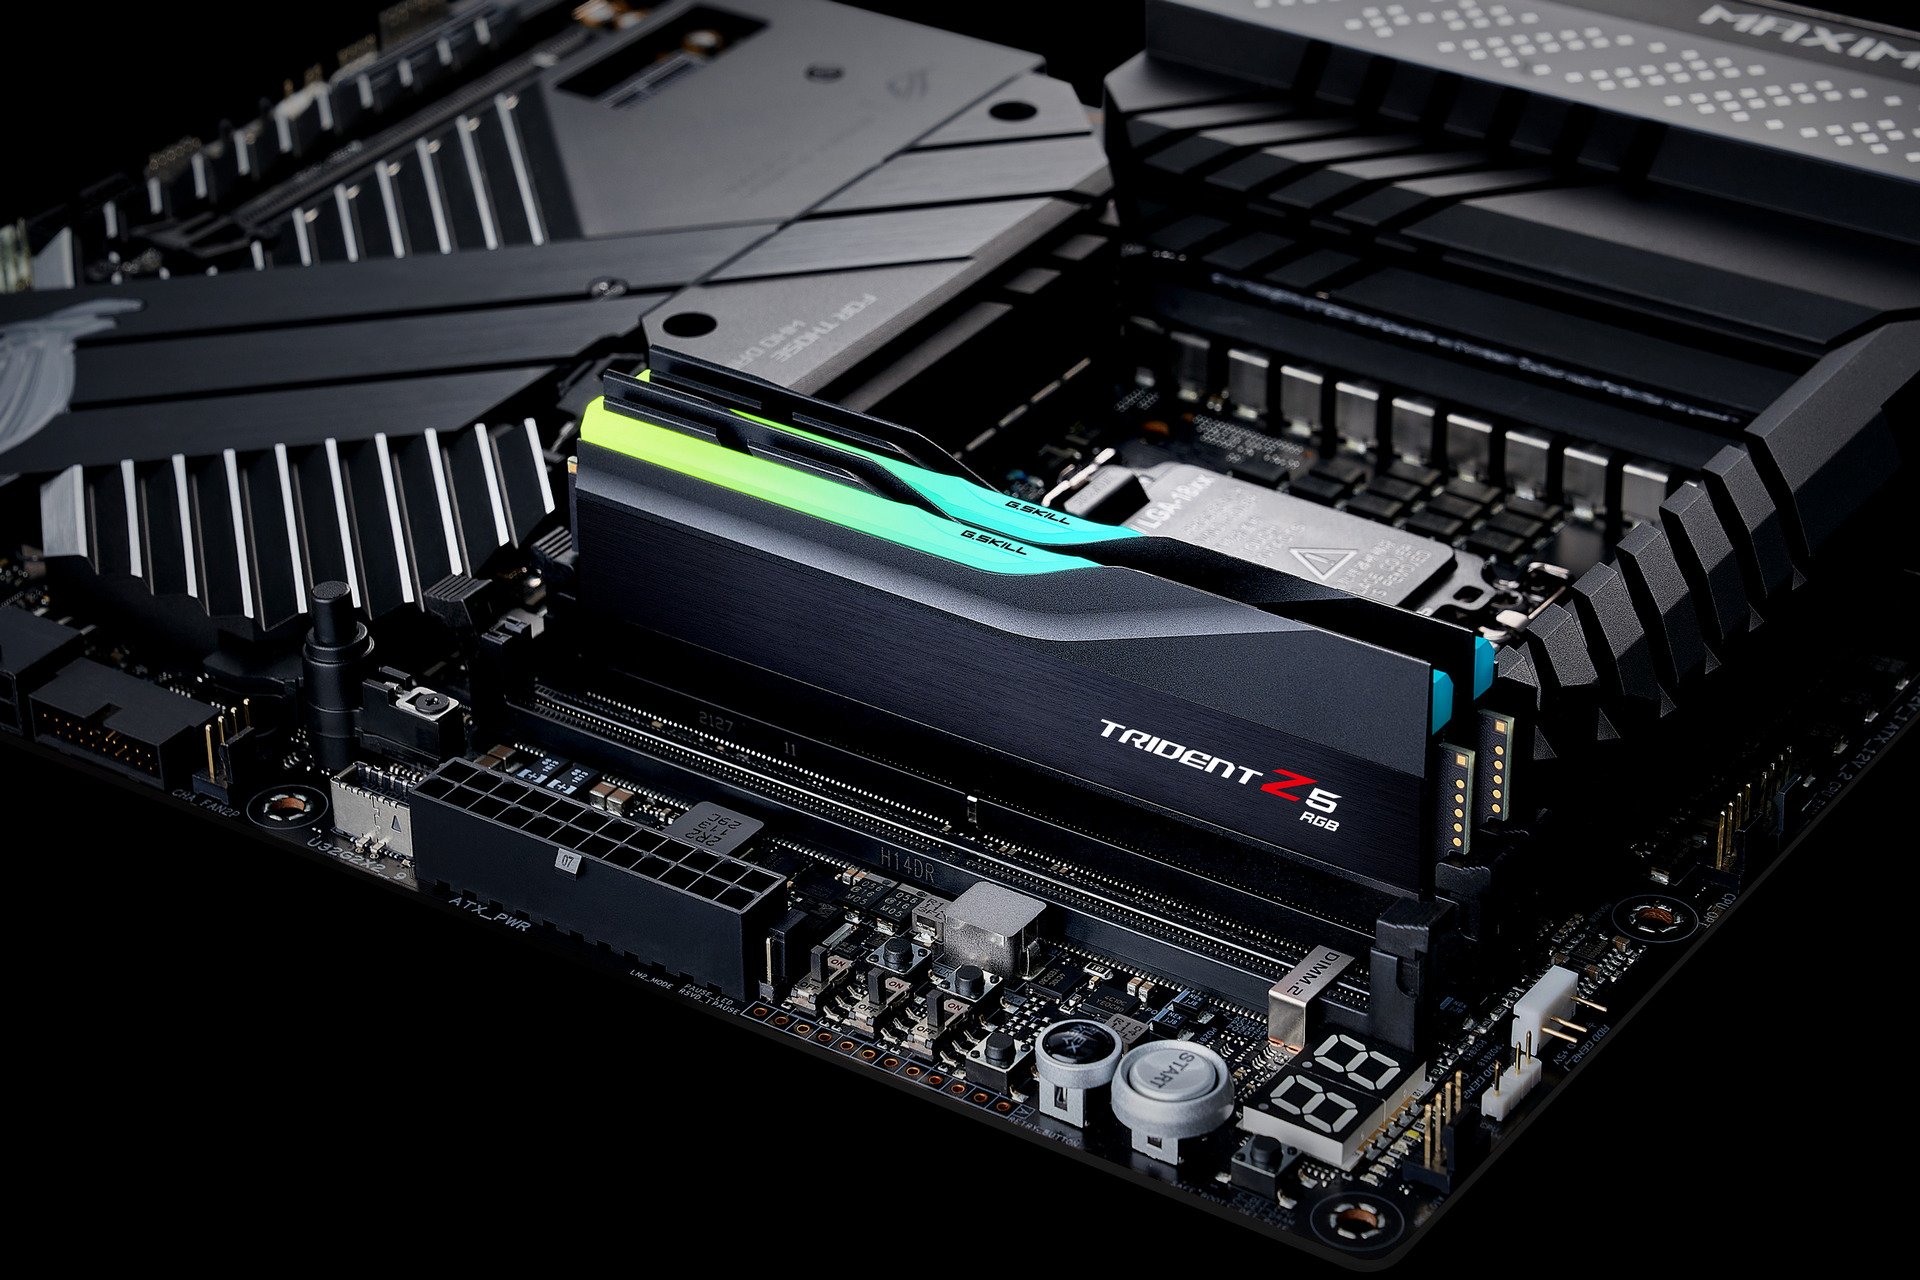 G.SKILL just a RAM speed world record with its Trident DDR5 kit |